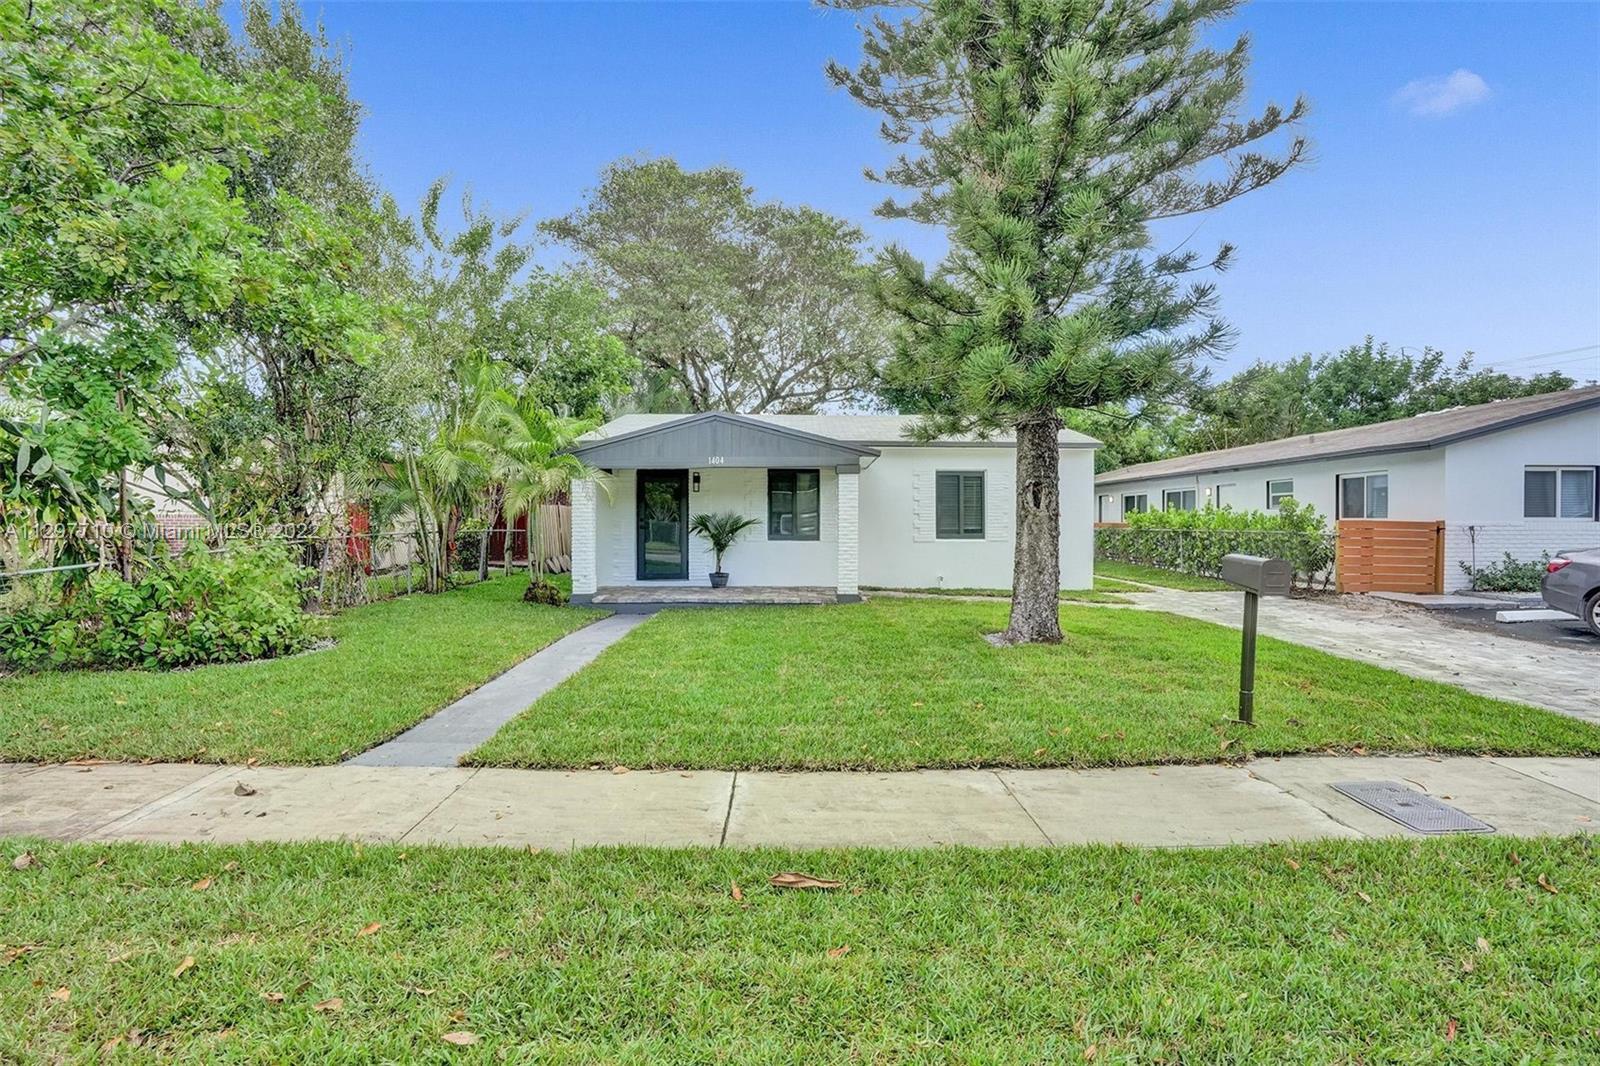 Great starter home located in an up and coming neighborhood near Wilton Manors.  New roof installed 